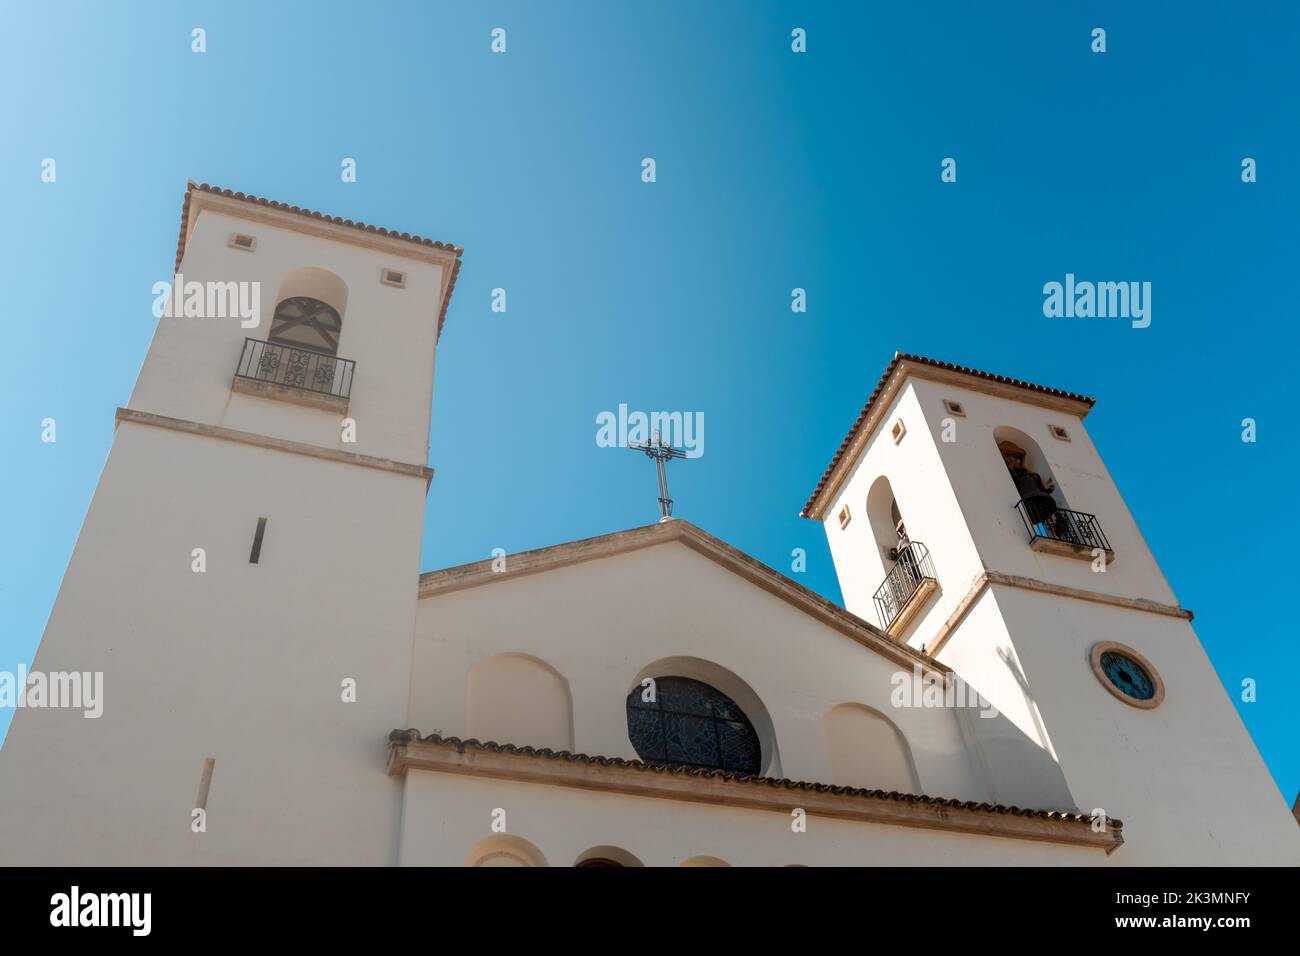 The low-angle view of Iglesia Santa Maria Magdalena under the blue sky Stock Photo